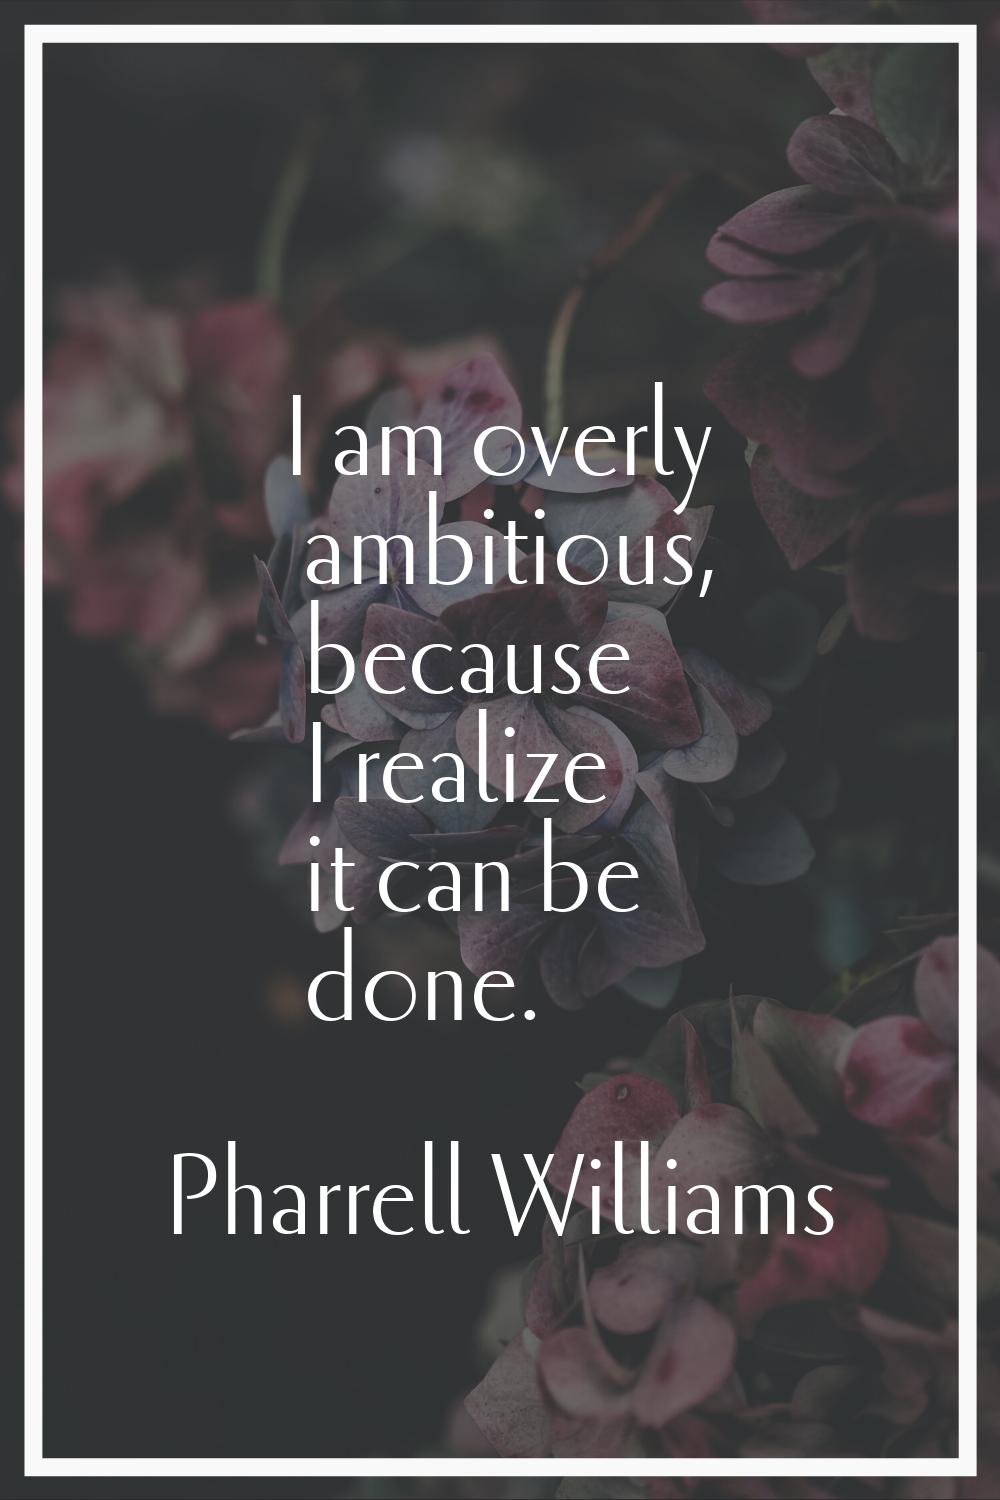 I am overly ambitious, because I realize it can be done.